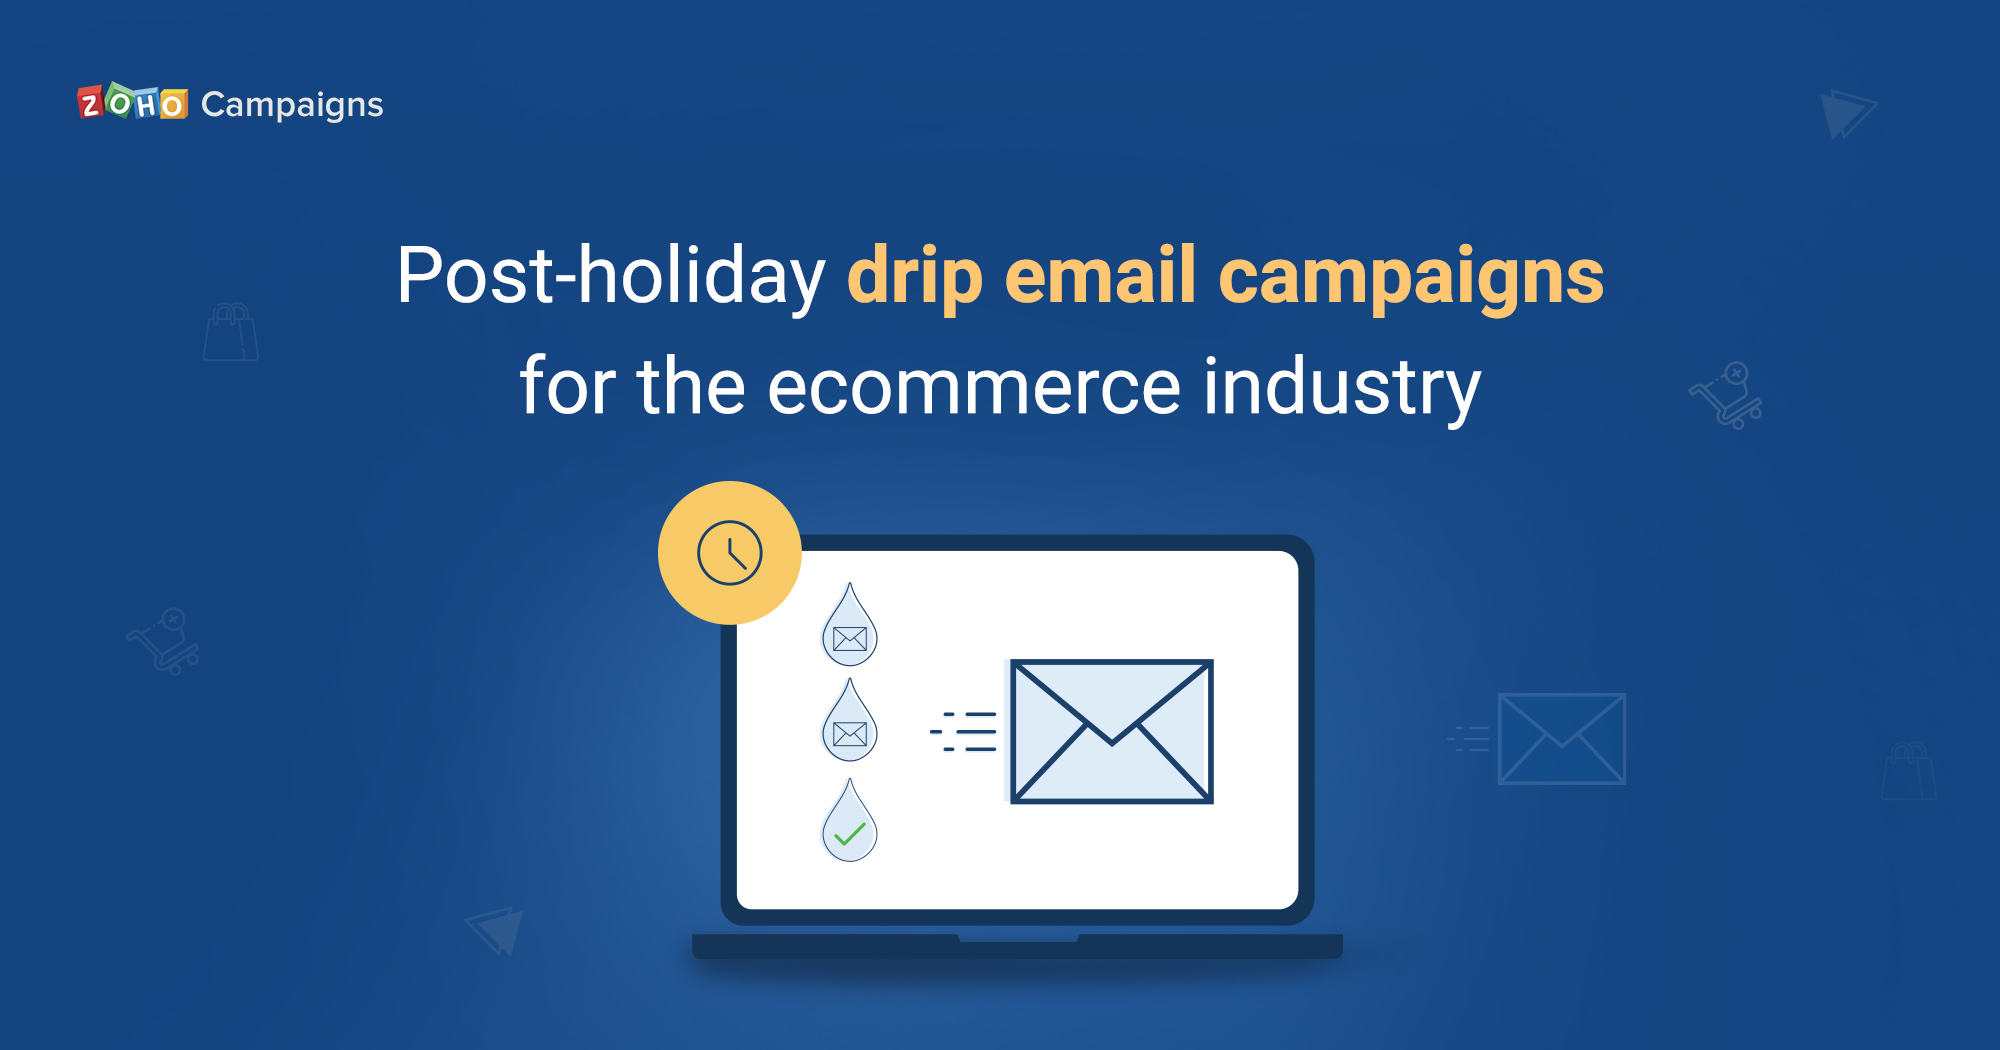 Post-holiday drip email campaigns for the ecommerce industry